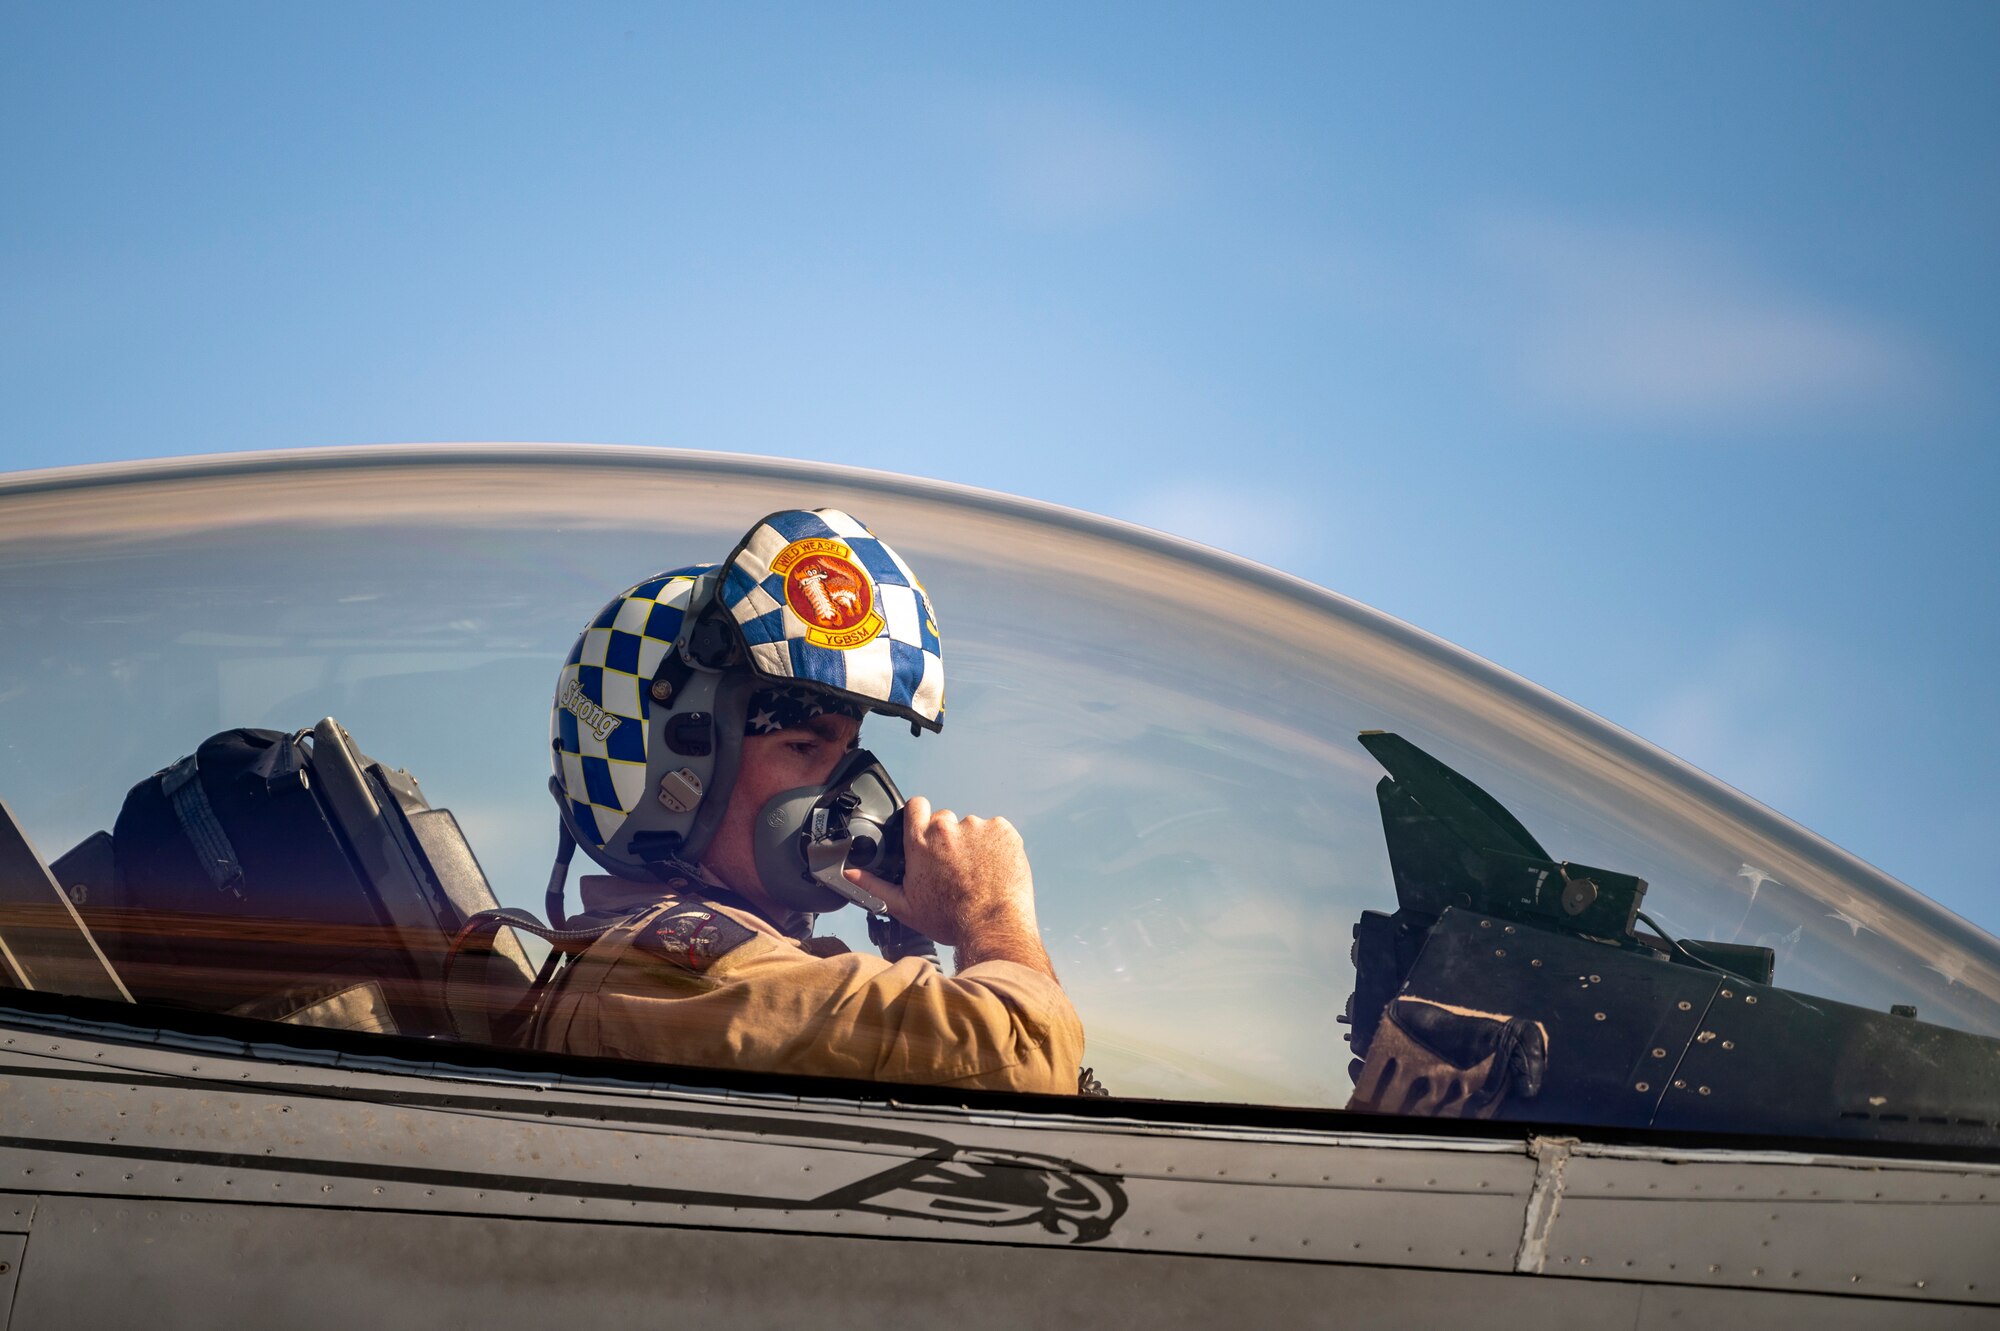 U.S. Air Force Capt. Connor Cola, 55th Expeditionary Fighter Squadron F-16C Fighting Falcon pilot, participates in a Forward Area Refueling Point (FARP) exercise for two F-16Cs Nov. 26, 2021, at an undisclosed location somewhere in Southwest Asia.